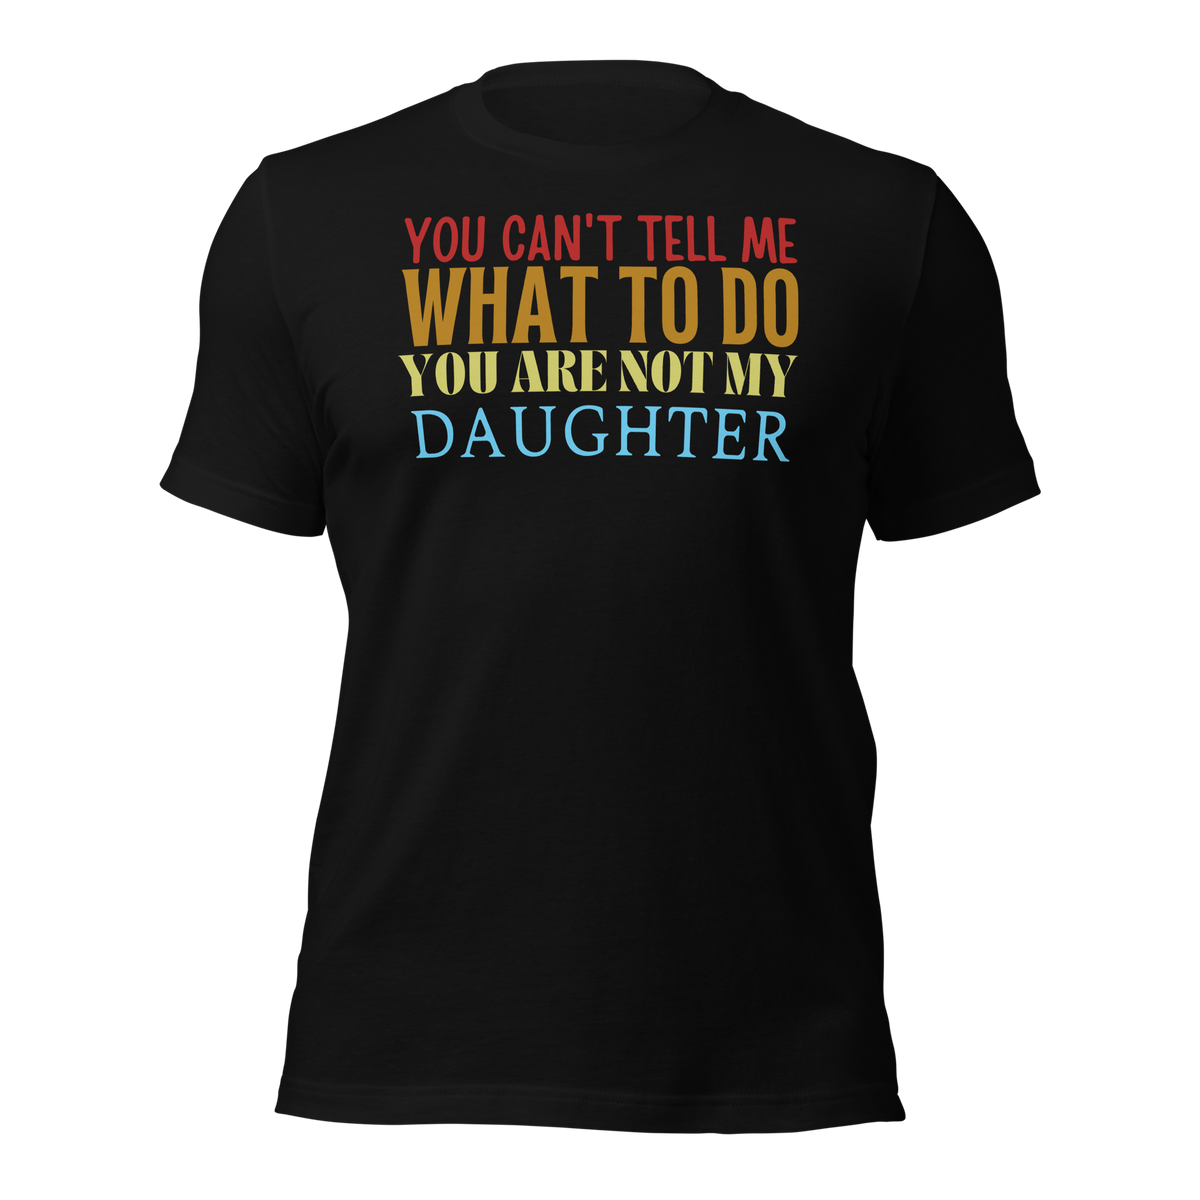 Dad Shirt, Fathers Day Shirt, Funny Mens Shirt, Funny Dad Shirt, Tell me what to do, Gift for him, Gift for her, New Papa Gift, Funny Mom Shirt, Mom Shirt, New Dad Shirt, Father Shirt, Dad tee, You Can't tell me What To Do You Are Not My Daughter Shirt